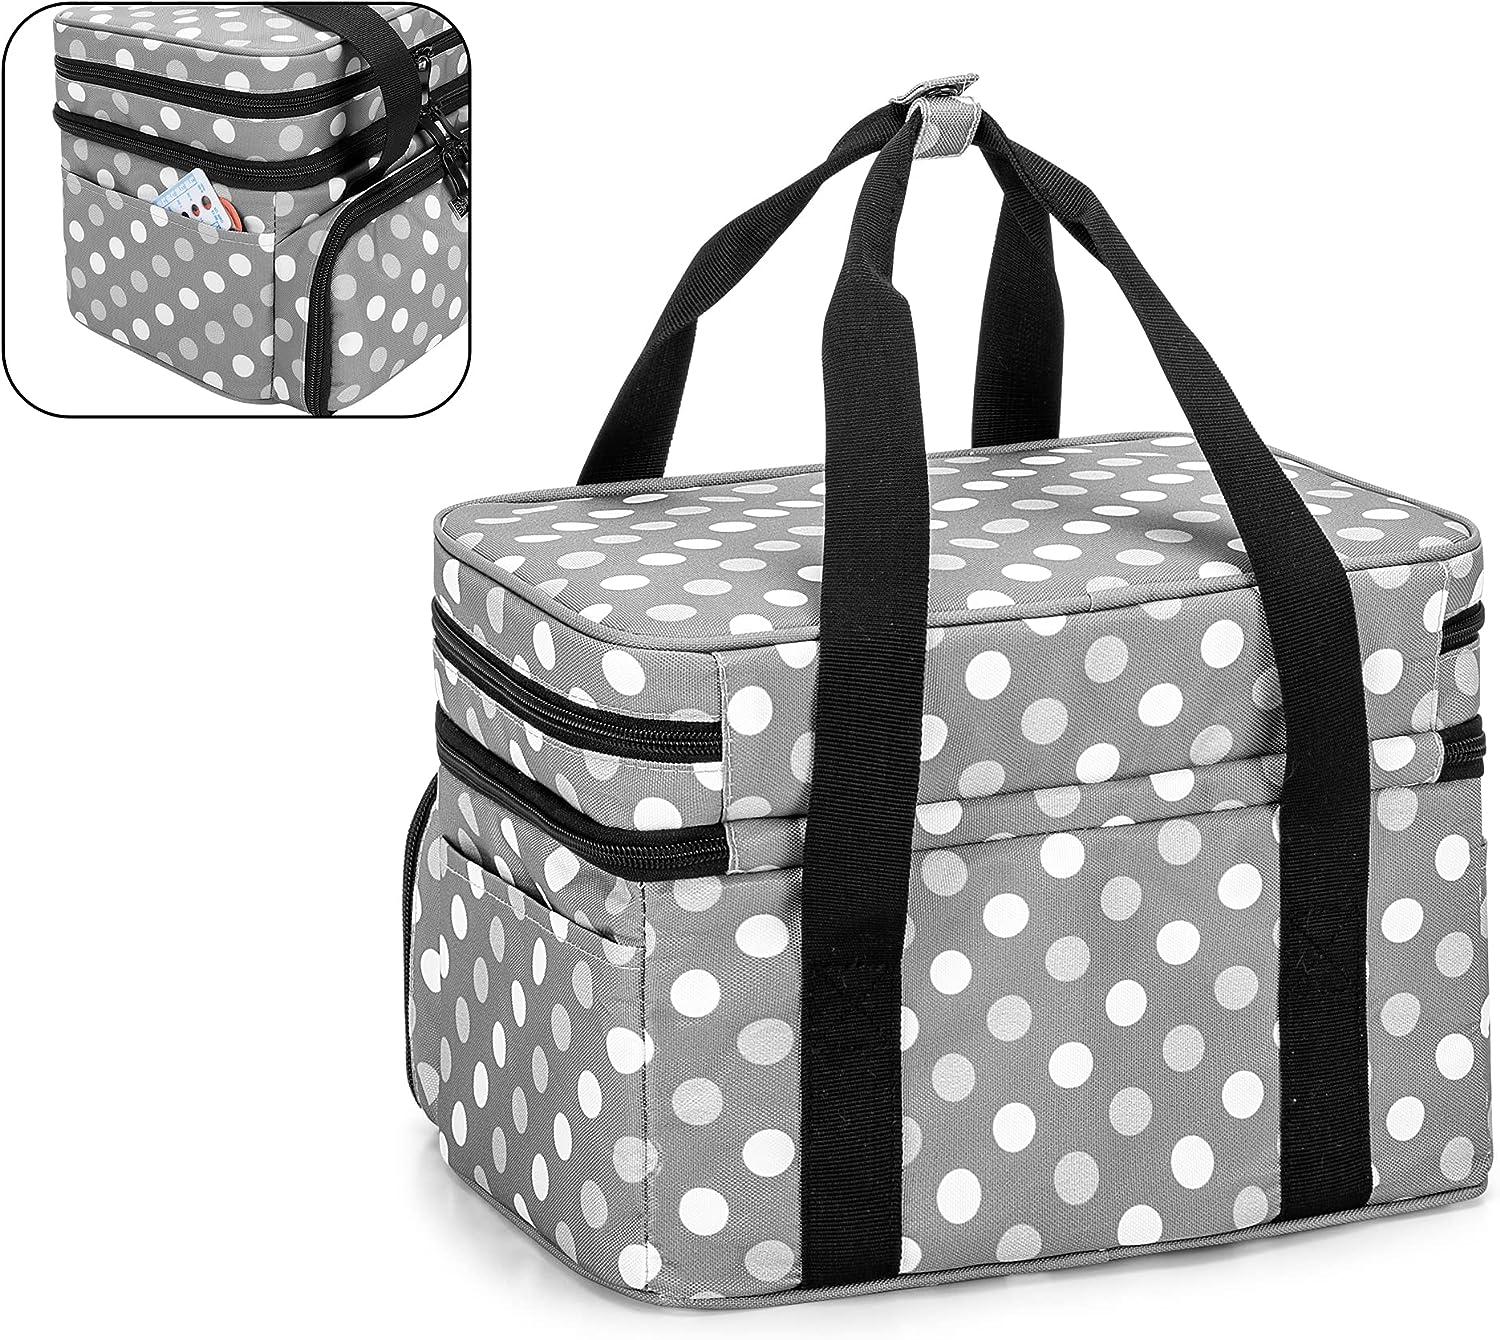 BAFASO Double Layer Sewing Accessories Organizer with 2 Detachable Pouches  Large Sewing Storage Bag for Sewing Tools (BAG ONLY) Polka Dots